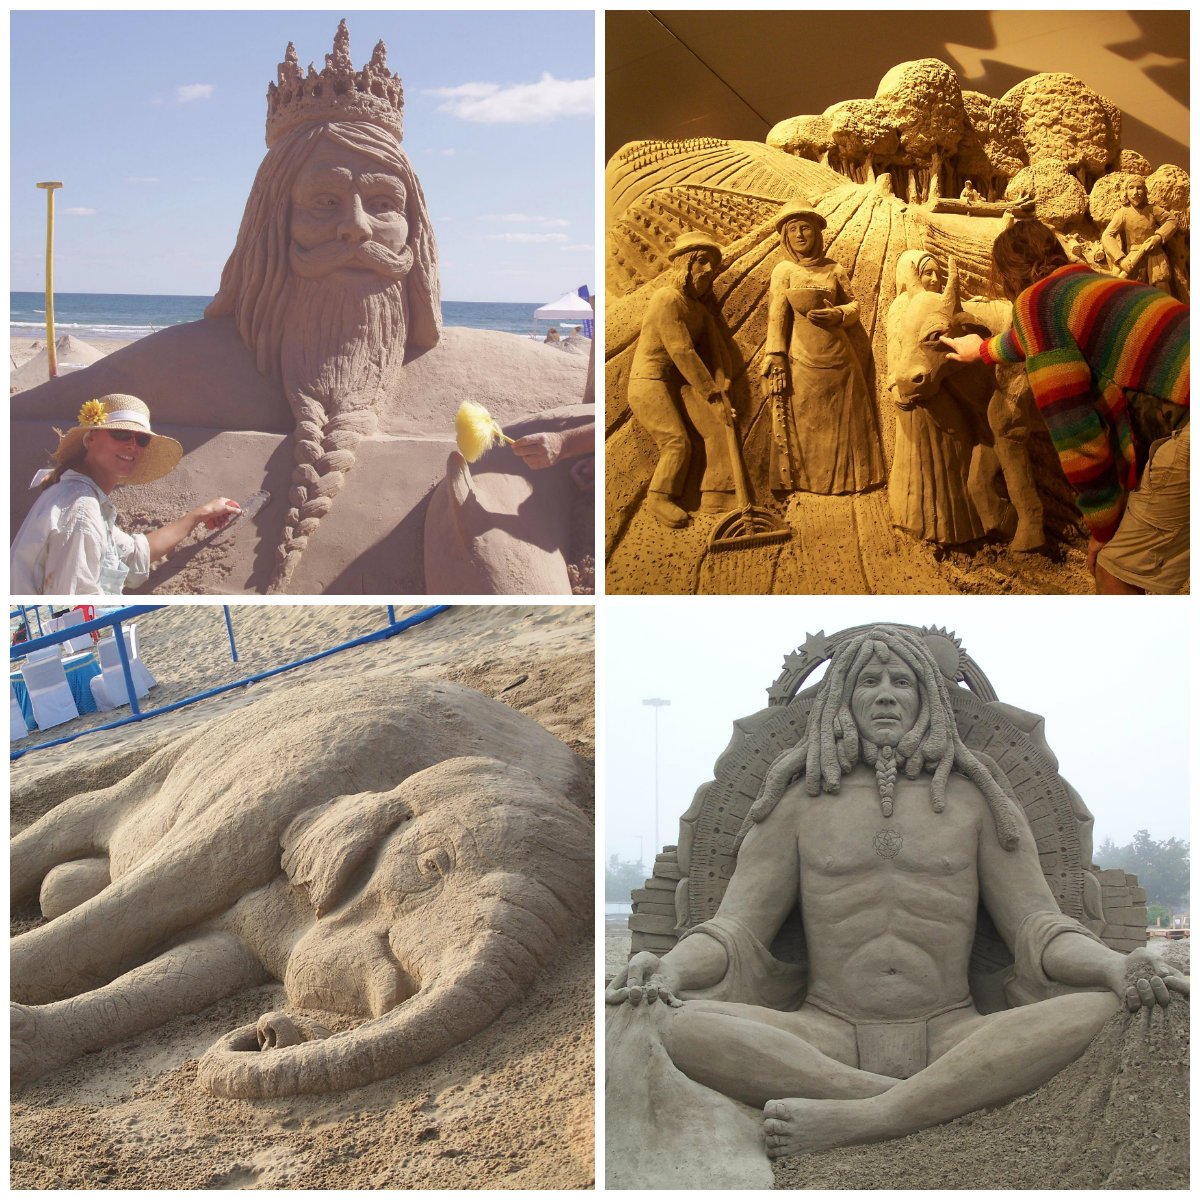 Examples of work by the artistic duo, who go by Sand Artist.